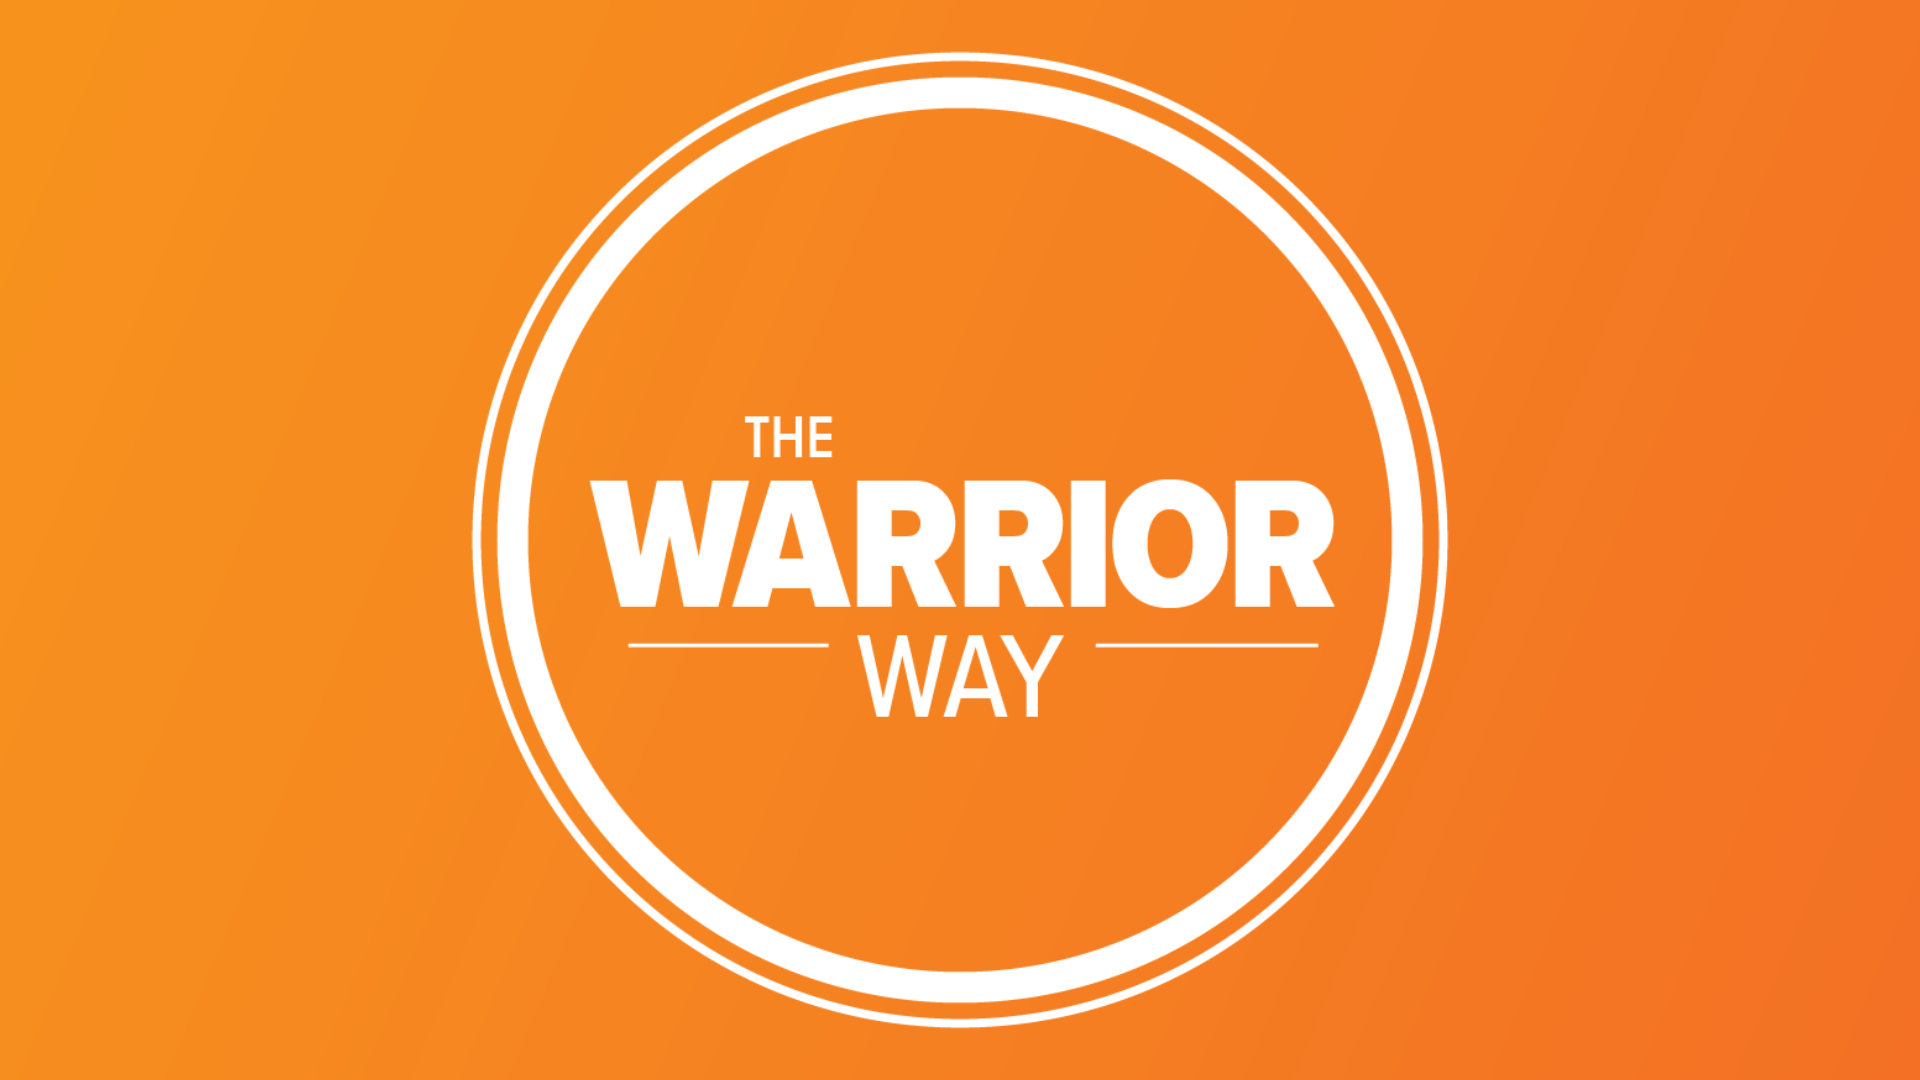 In this special edition of The Warrior Way, watch how Coloradans joined in a fight to seek solutions and rise above differences to bring people together, stronger.